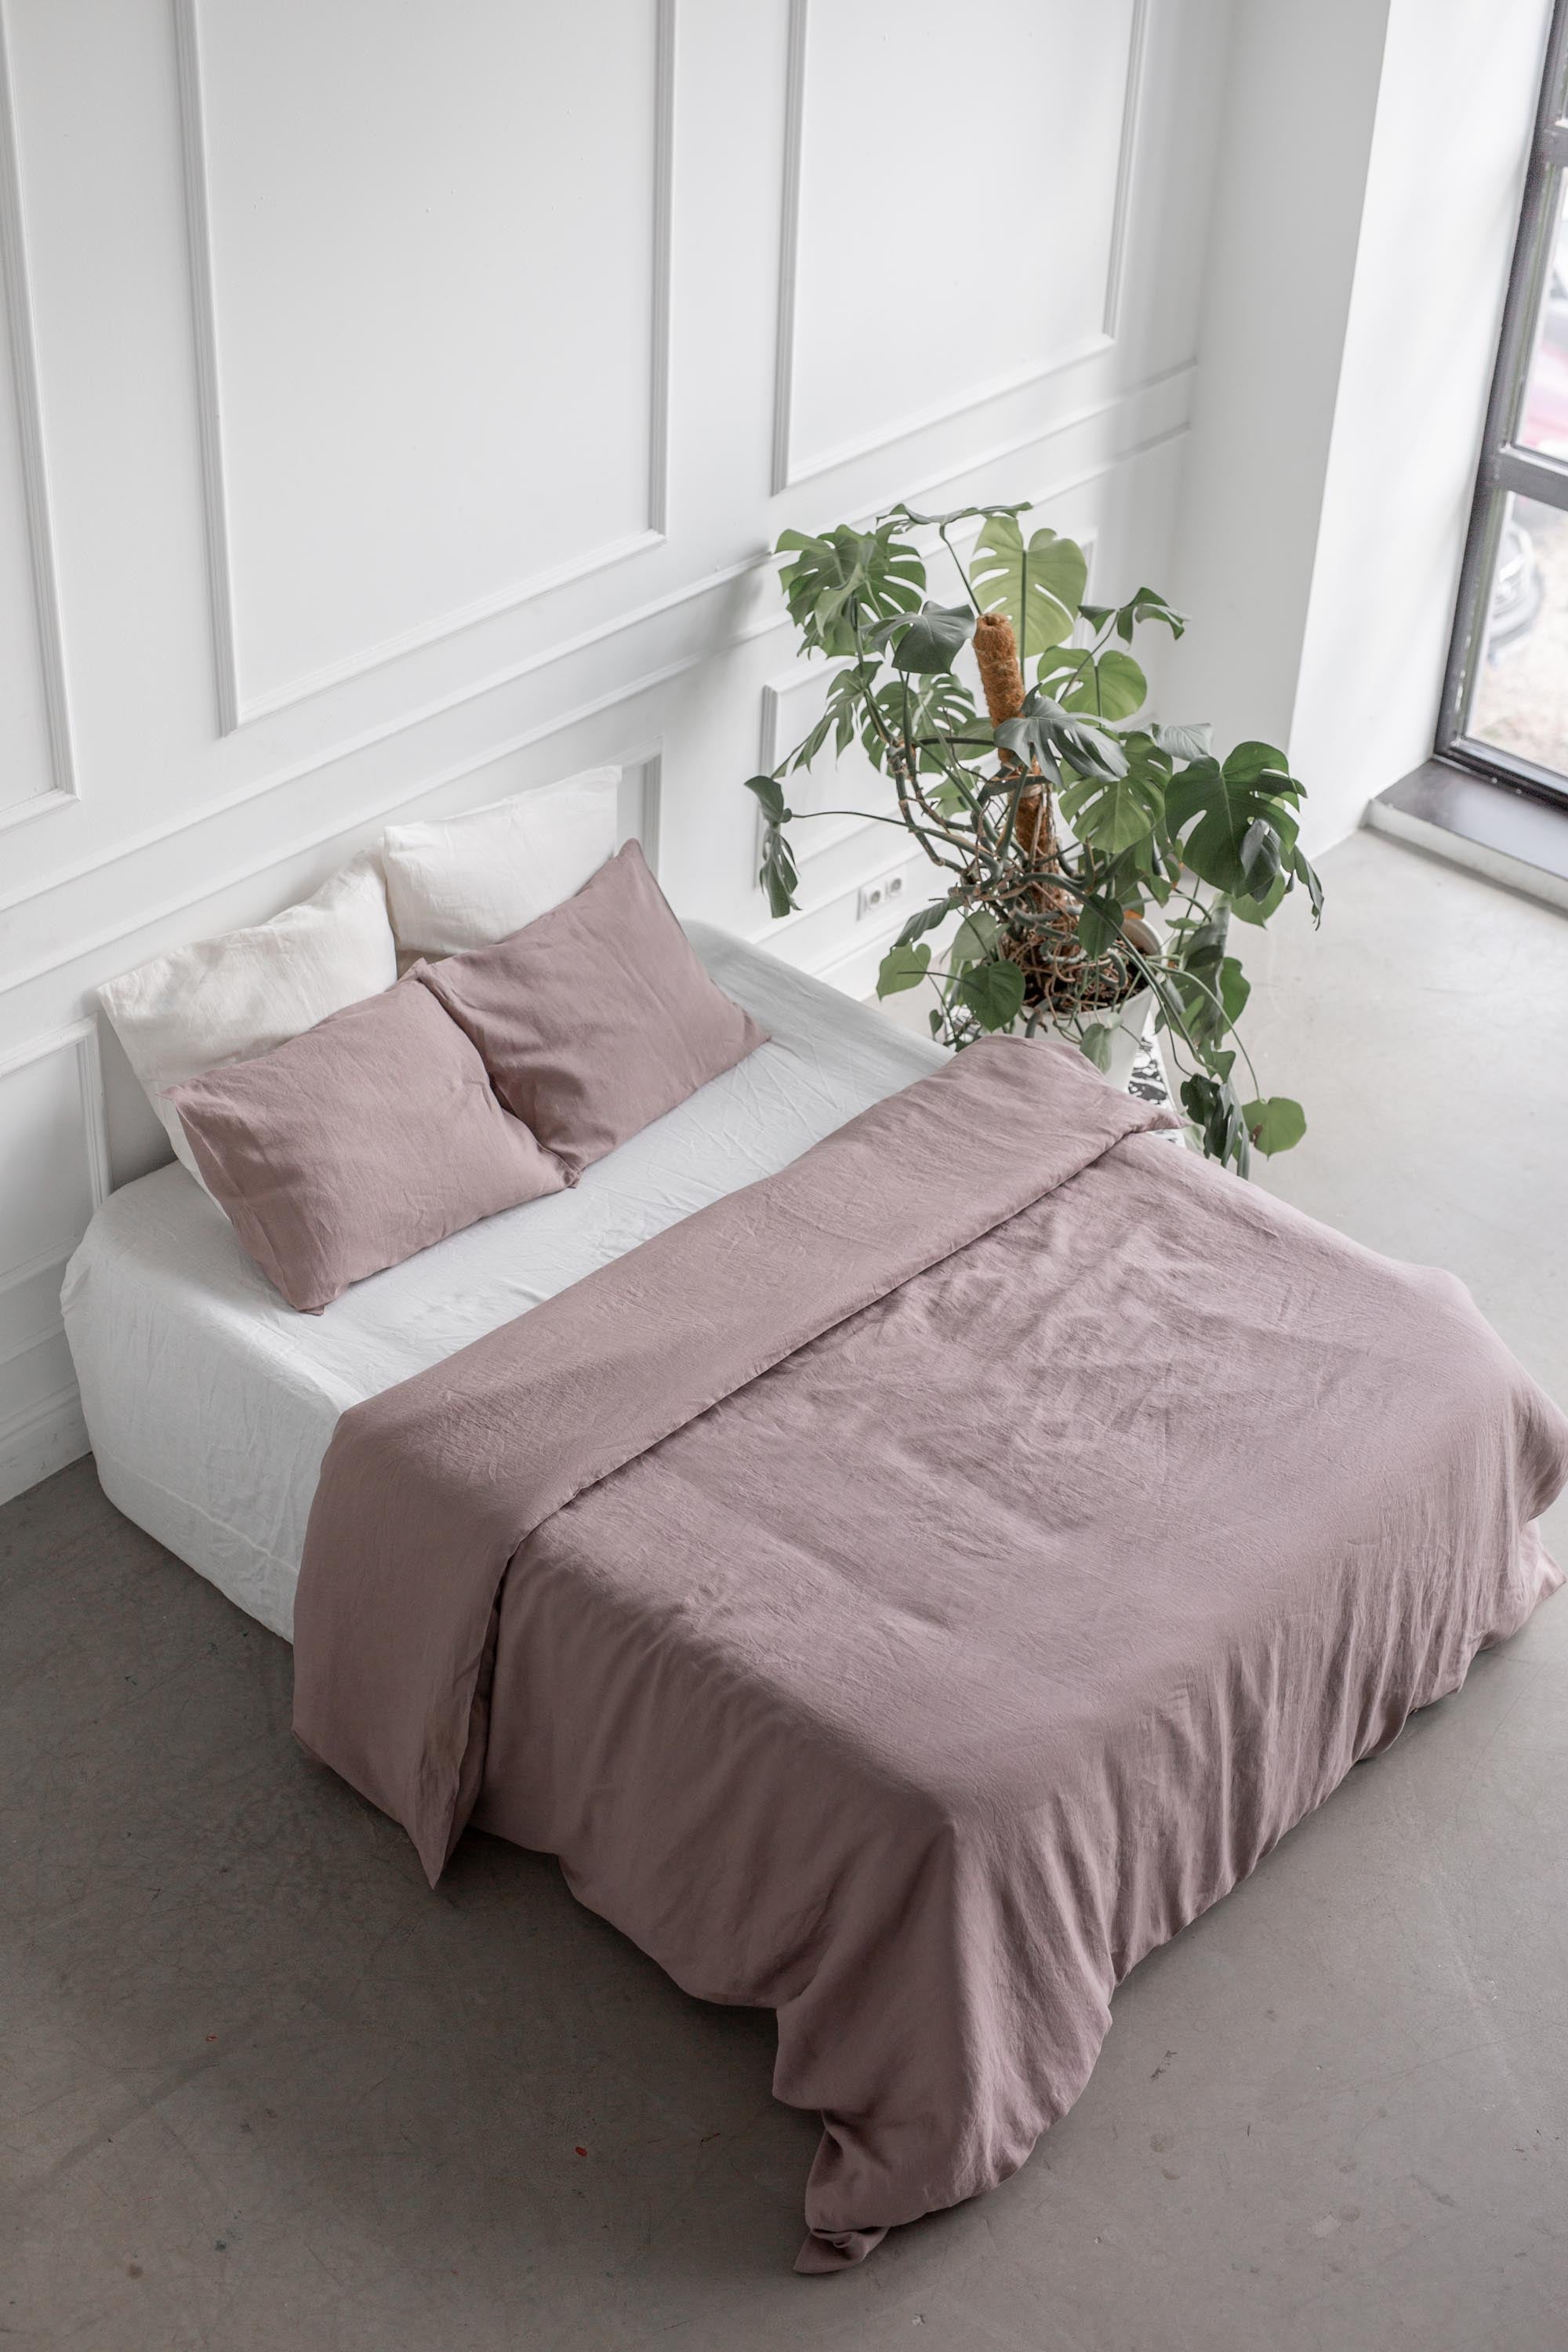 Bed in A white Spacious Room With A LInen Bedding Set In Rosy Brown BY AmourLinen